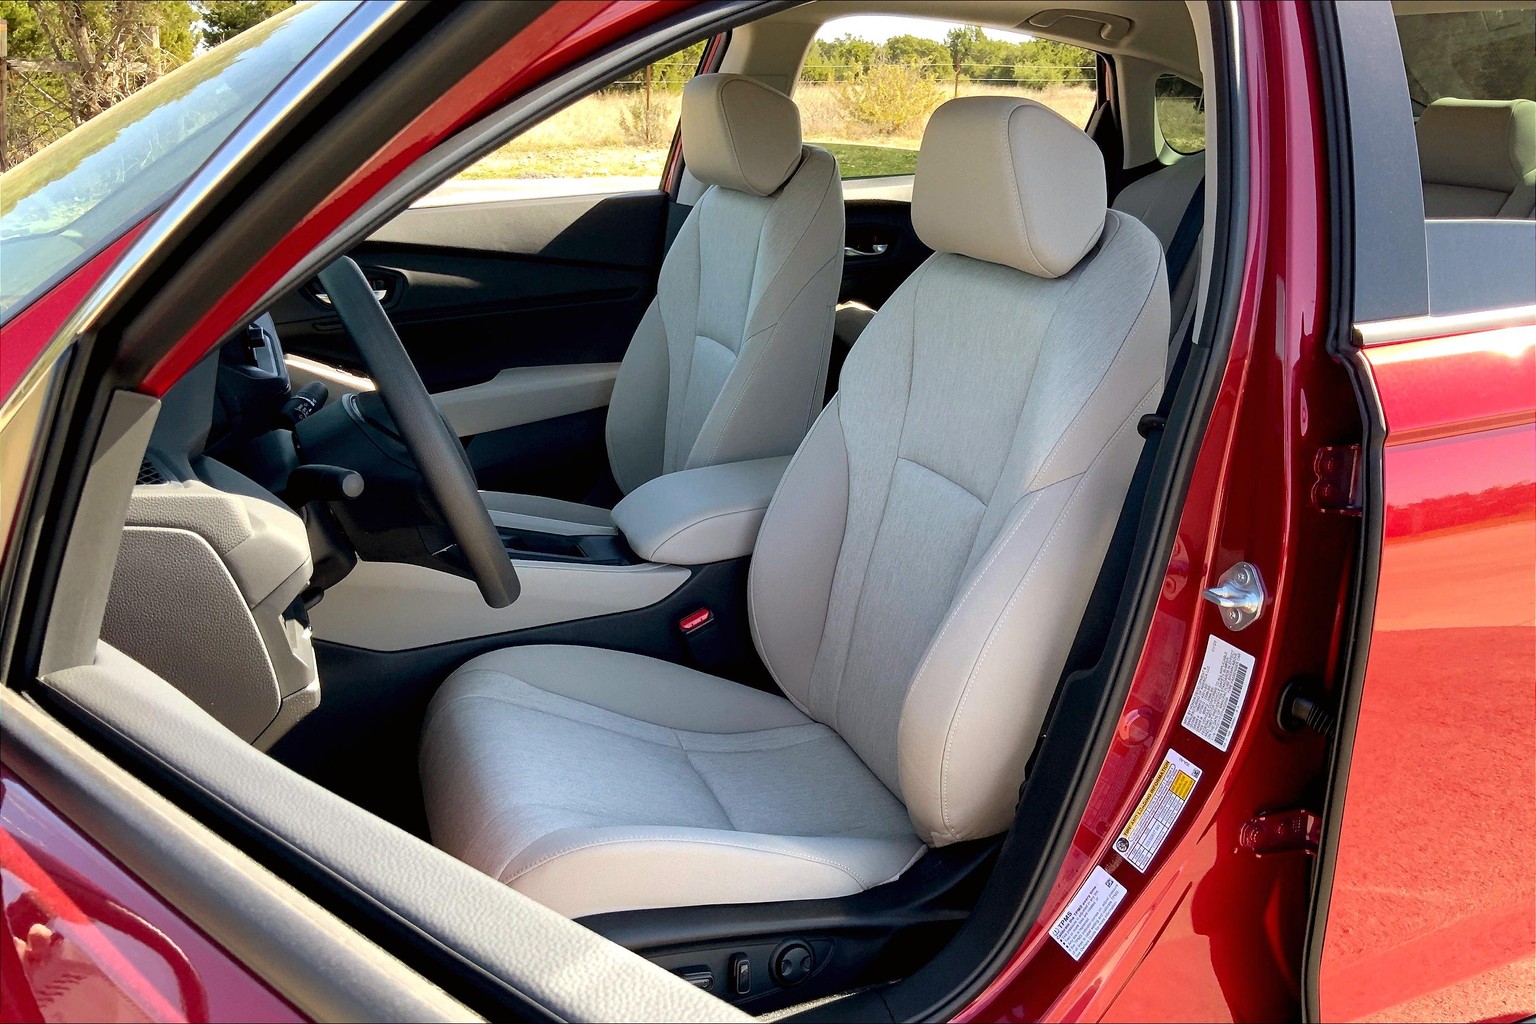 Which Honda Accord Has Red Interior?